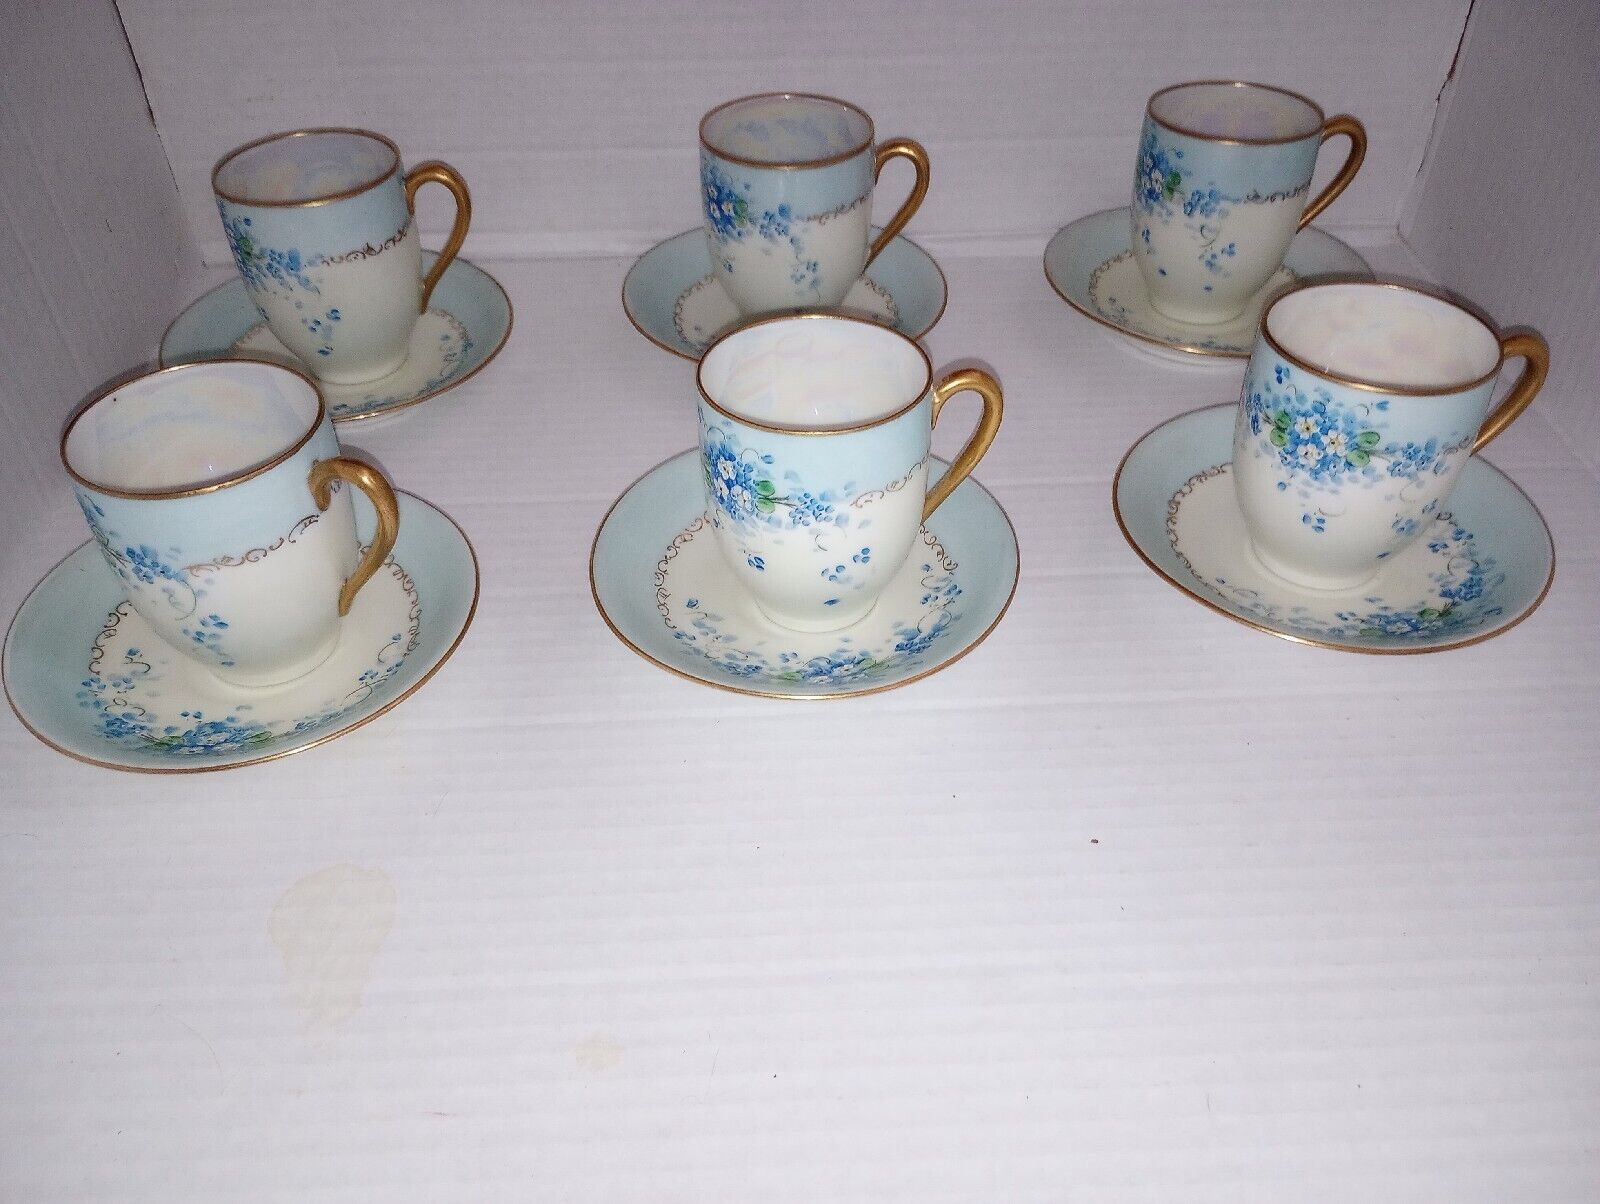 Antique Hand Painted Forget-me-nots Stouffer Teacups And Saucers